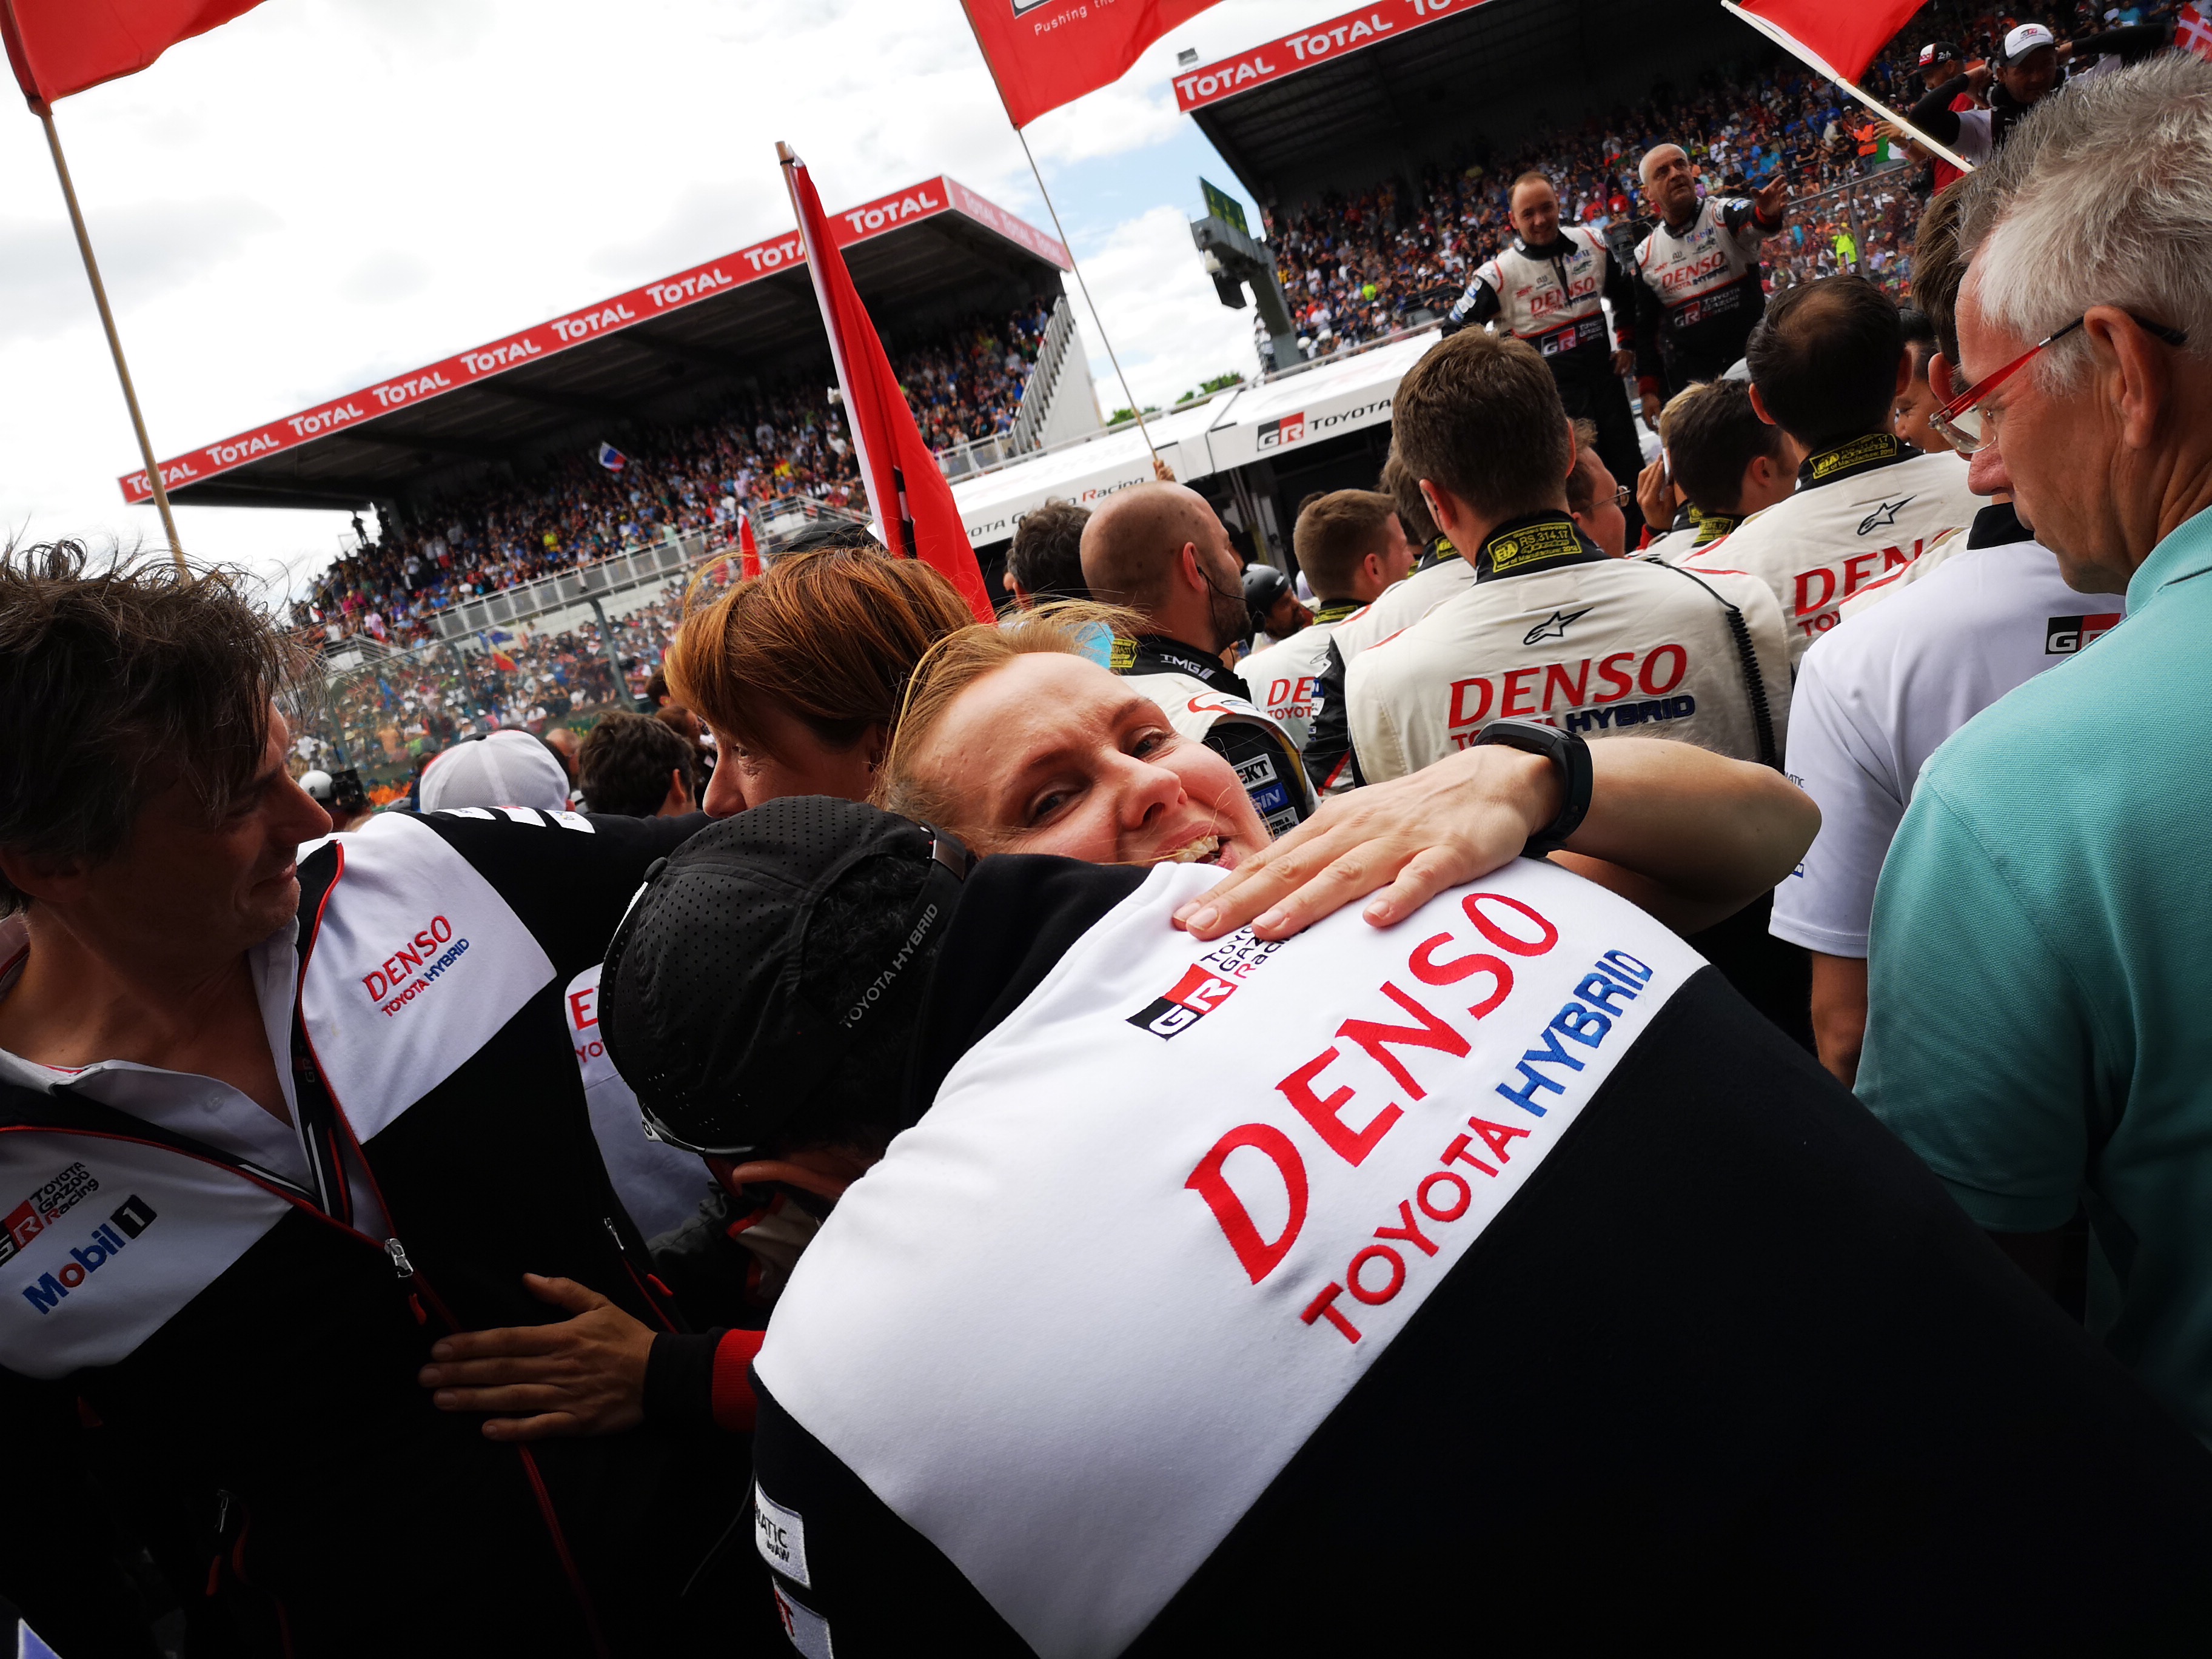 2018 Le Mans 24 Hours - post-race atmosphere in pitlane and podium